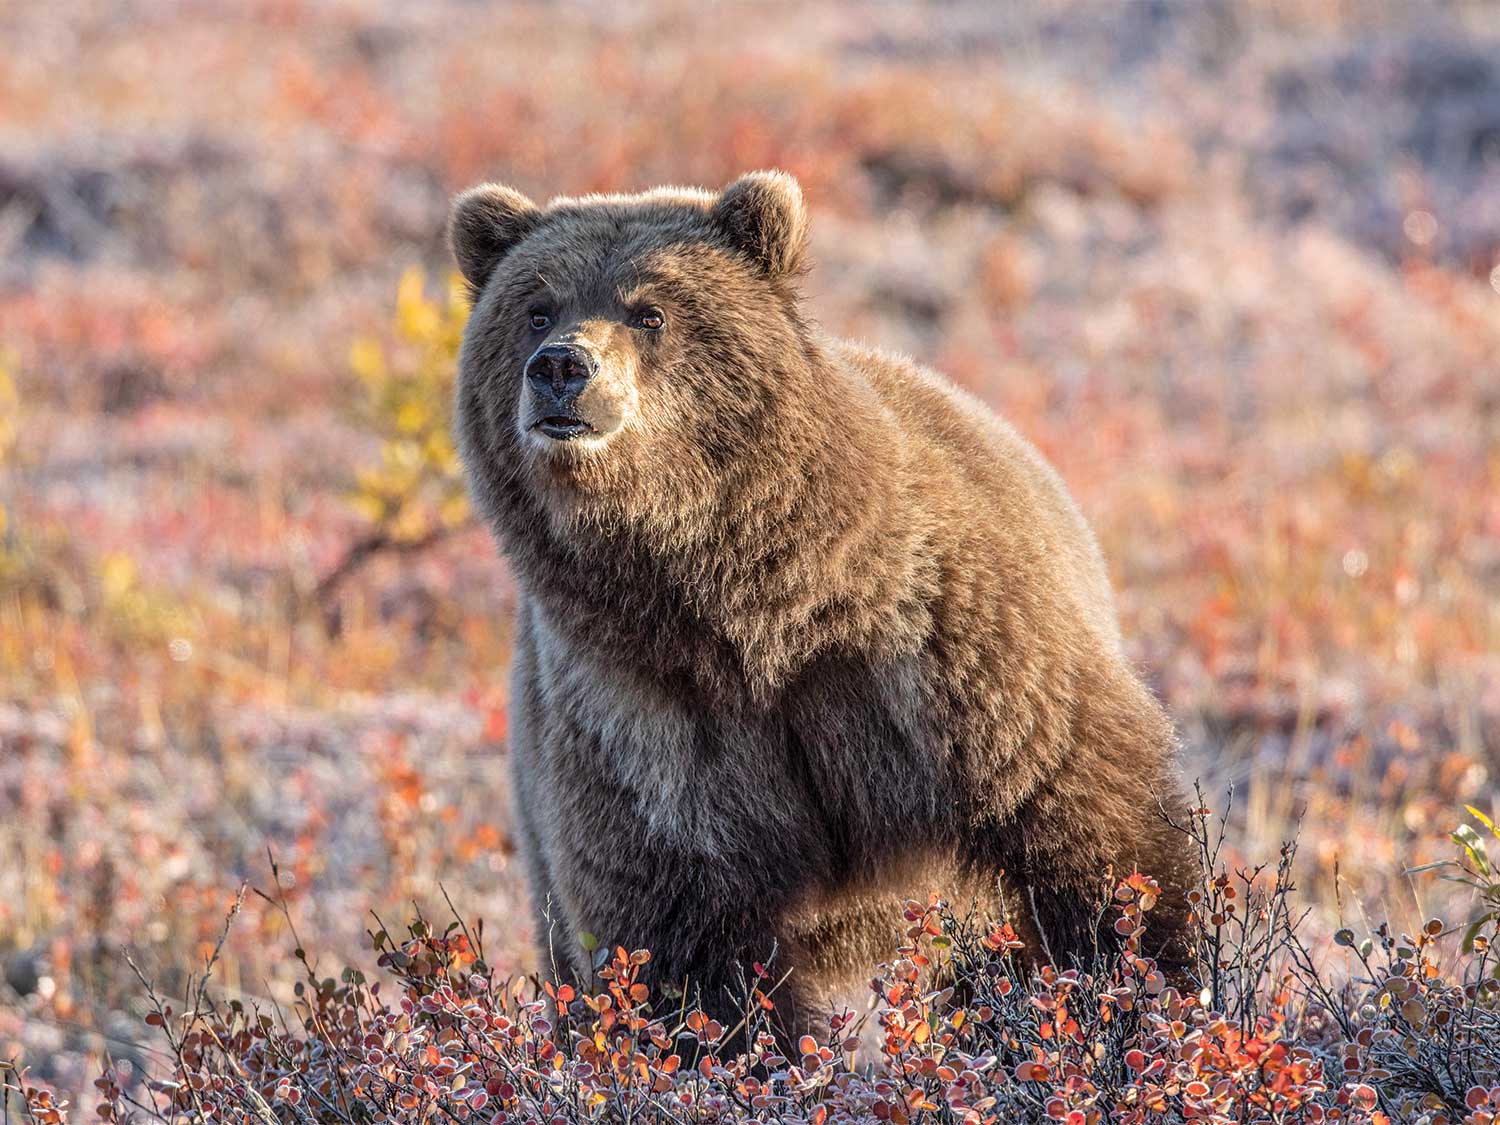 httpspush.outdoorlife.comsitesoutdoorlife.comfilesimages201906odl-grizzly-bear-fall-field.jpg